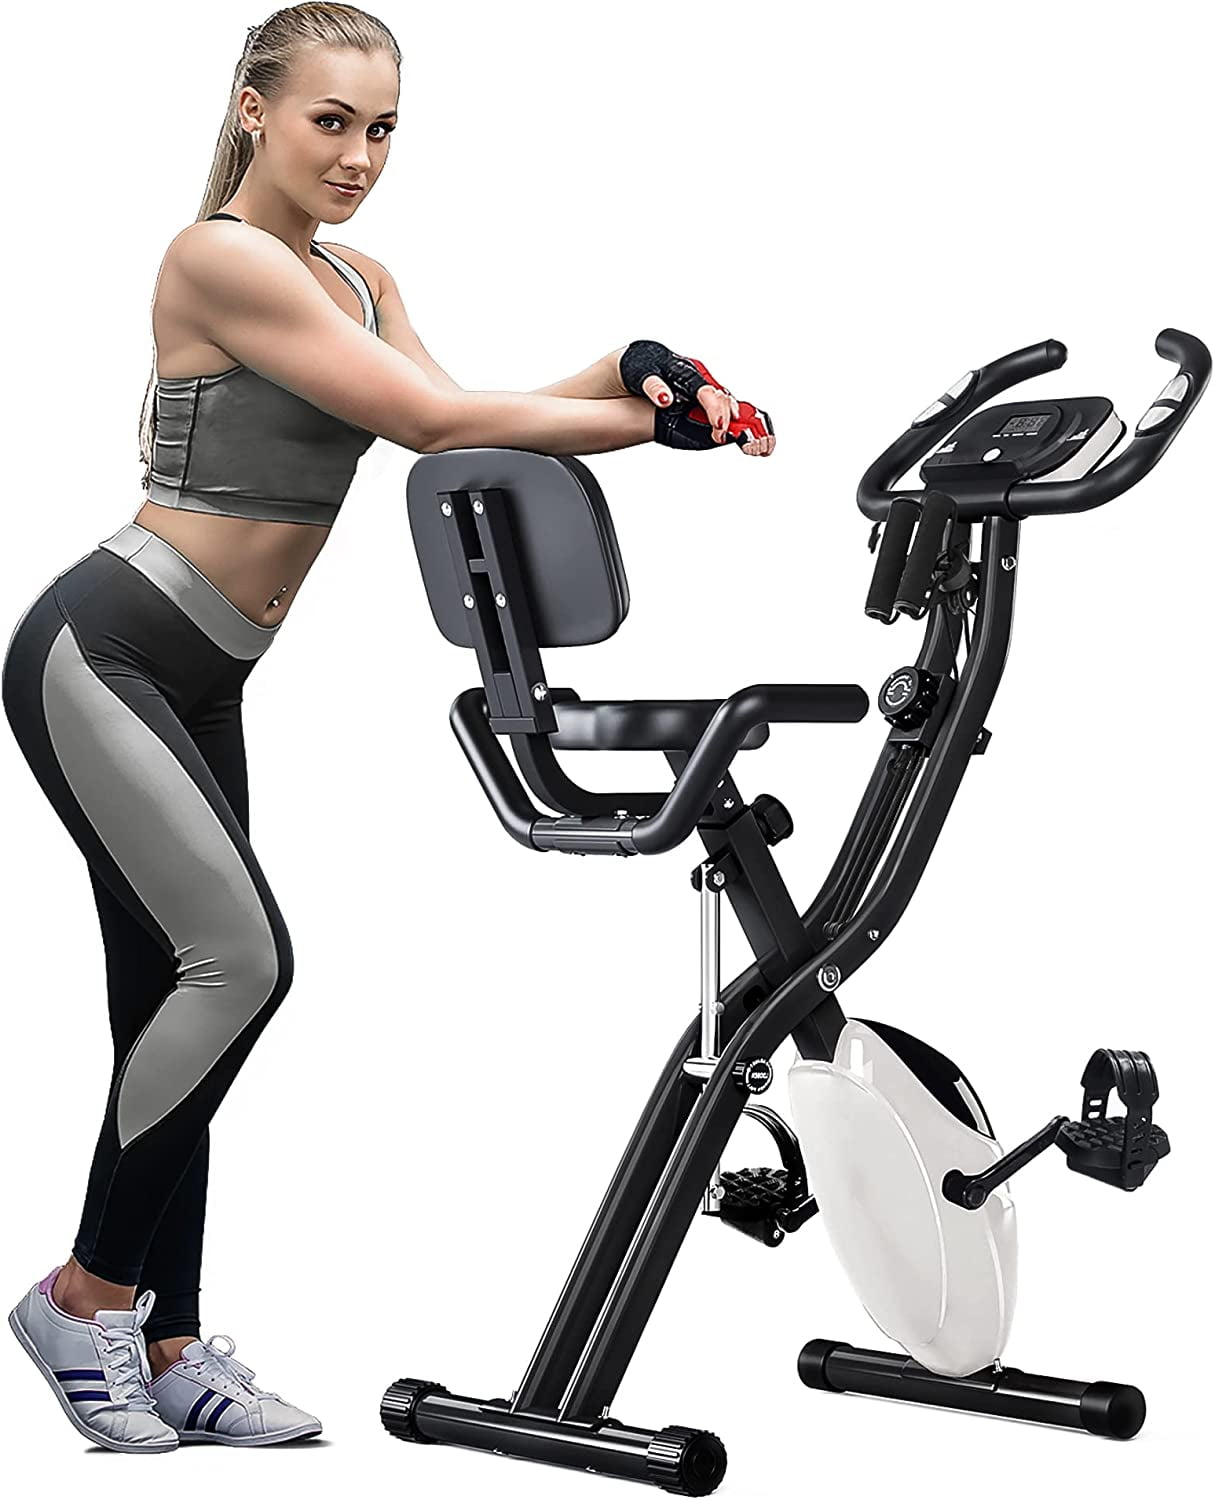 IM Beauty Folding Upright and Recumbent Foldable Stationary Bike Exercise Bike with 10-Level Adjustable Magnetic Resistance, Perfect Workout Bike for Home Use for Men, Women, and Seniors